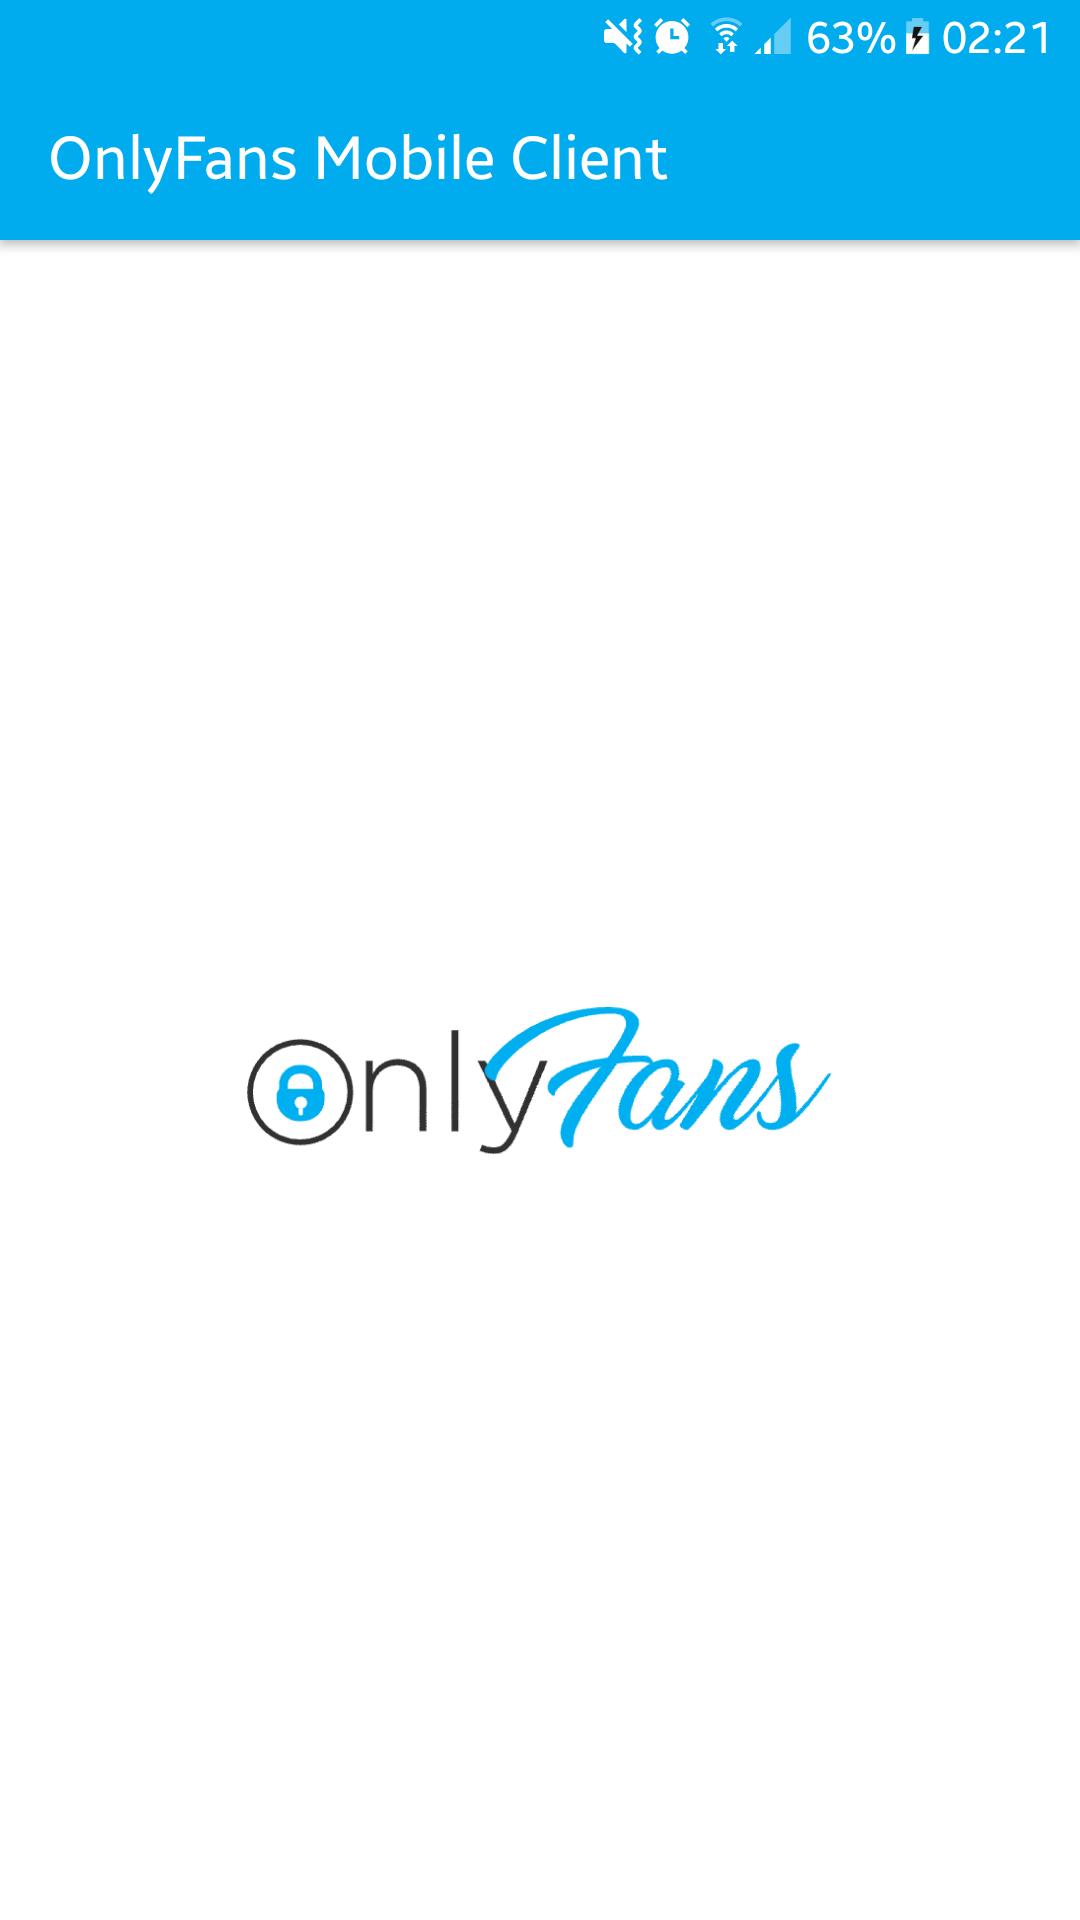 Only fans dropbox Update Onlyfans